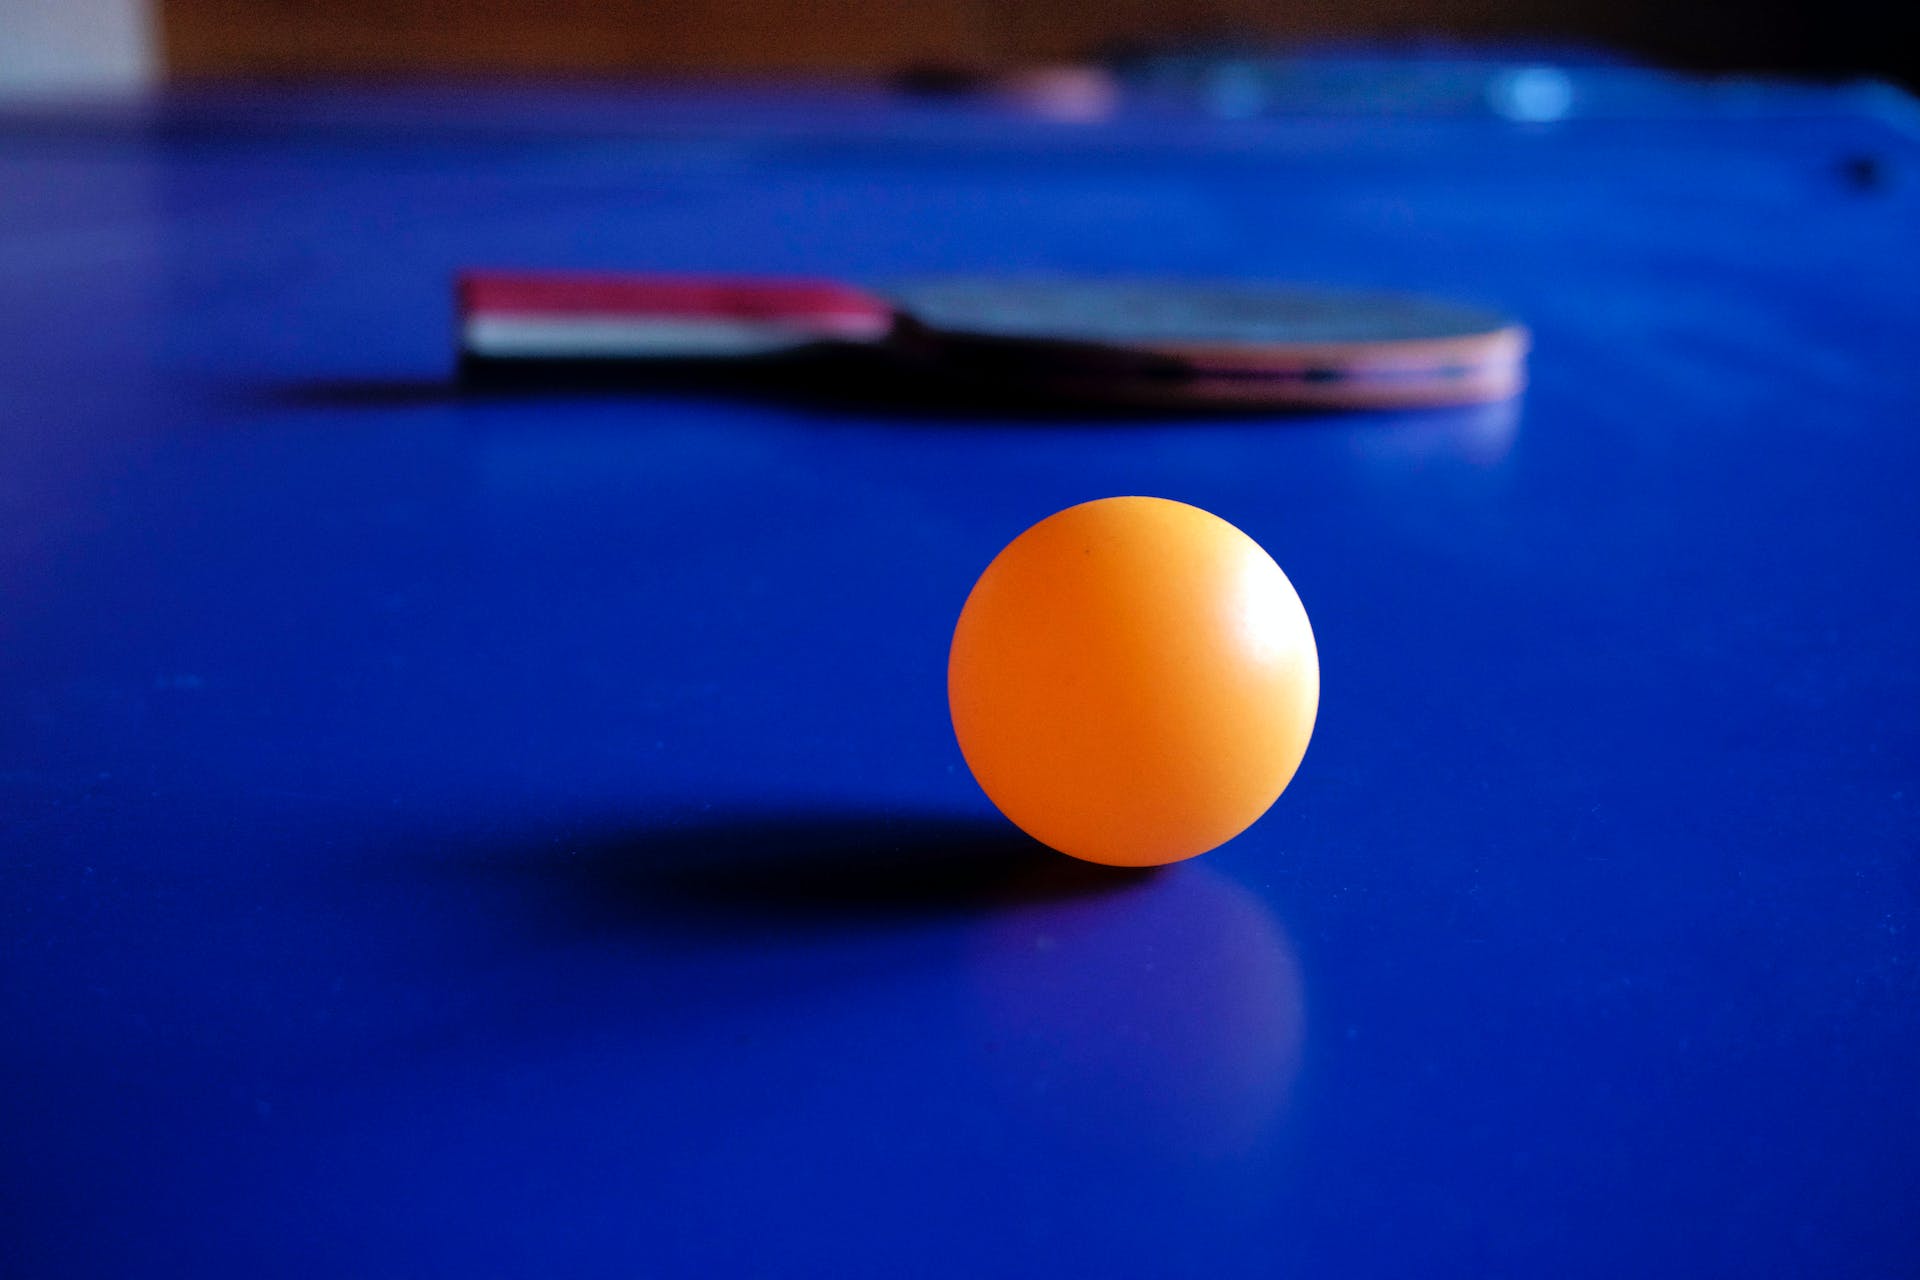 The Rules of Table Tennis